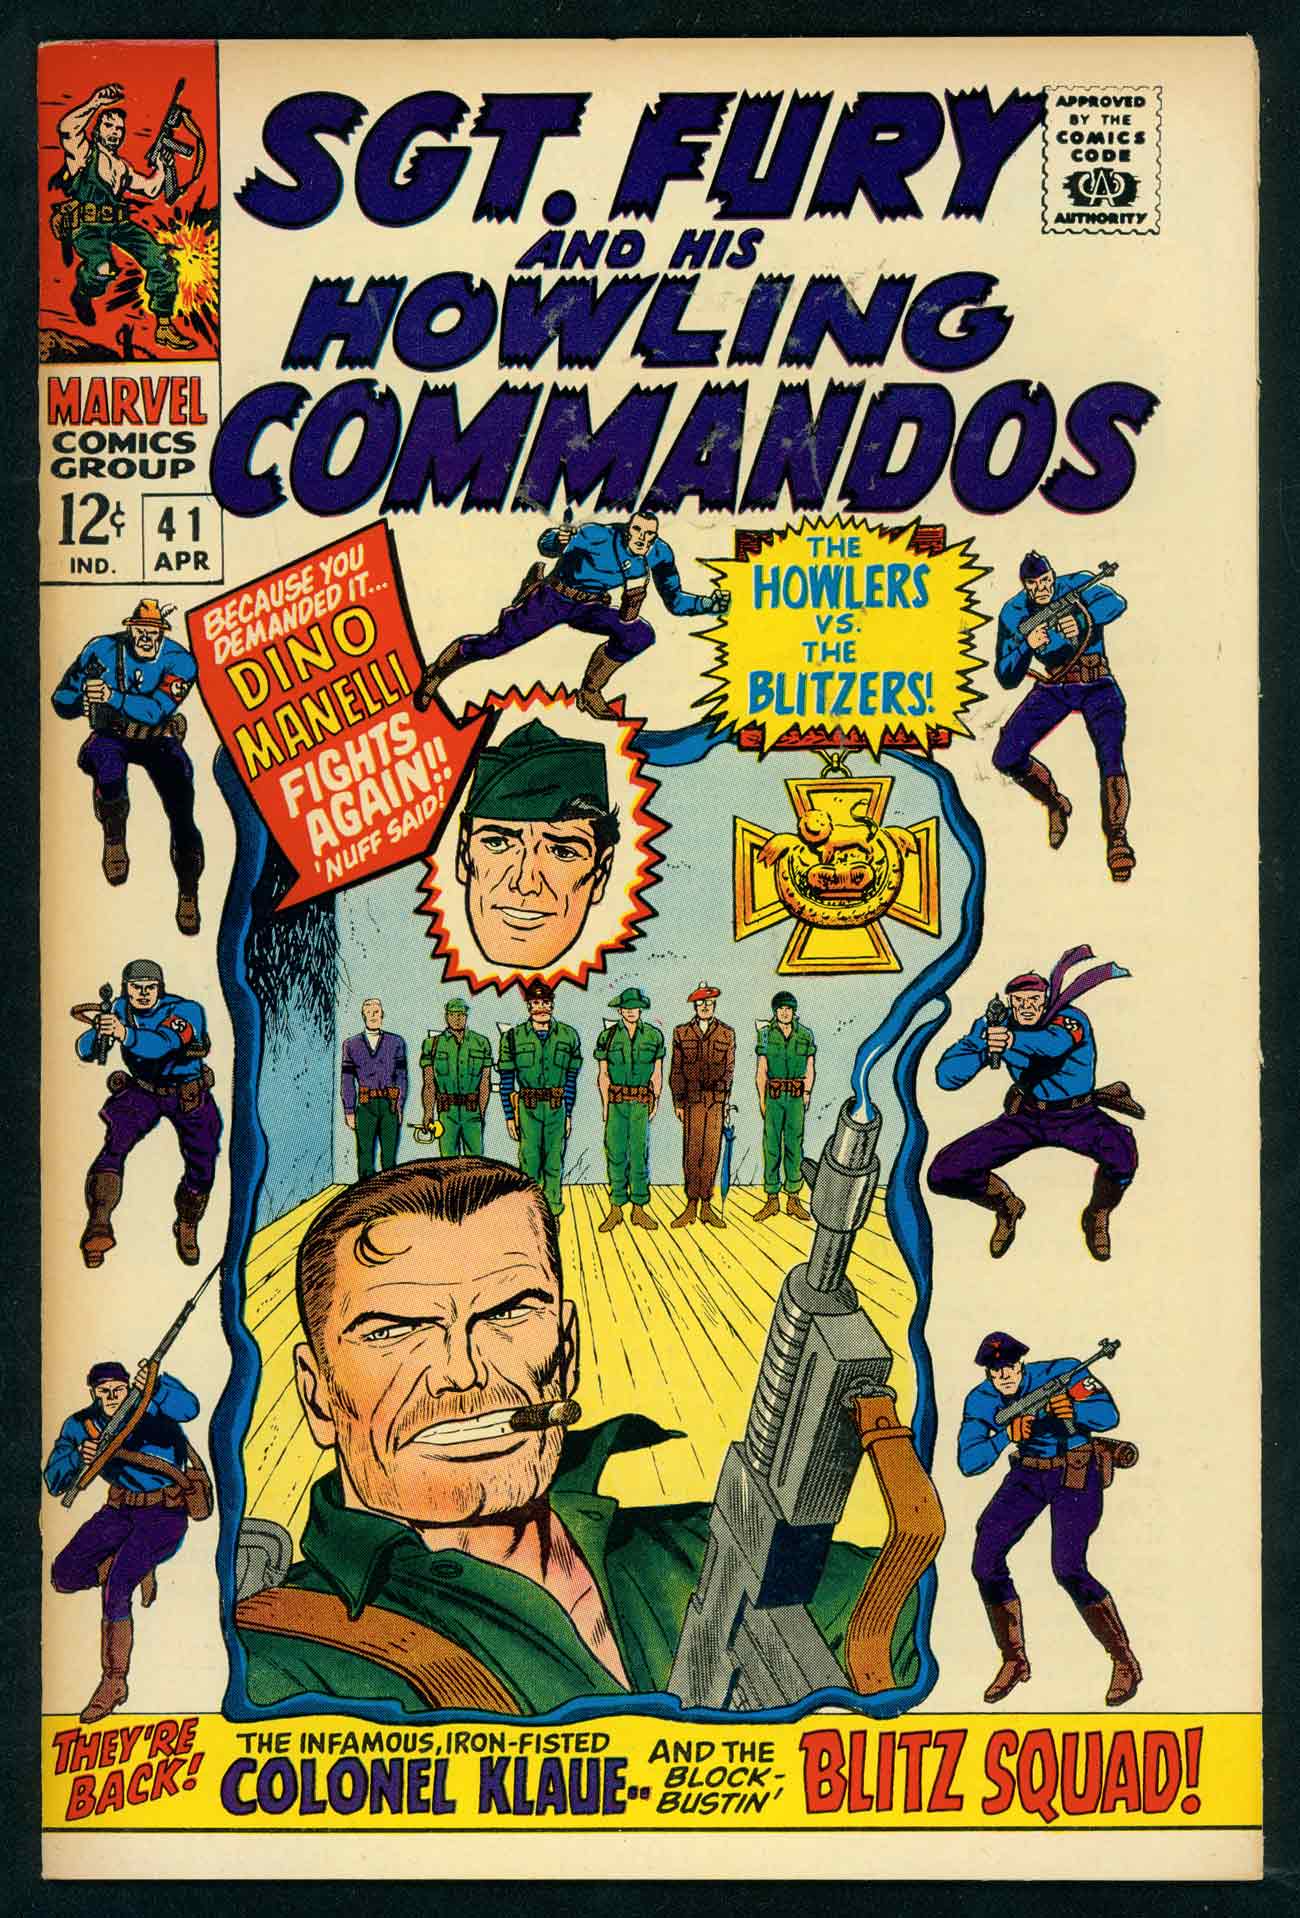 ComicConnect - SGT. FURY AND HIS HOWLING COMMANDOS (1963-81) #41 - VF: 8.0